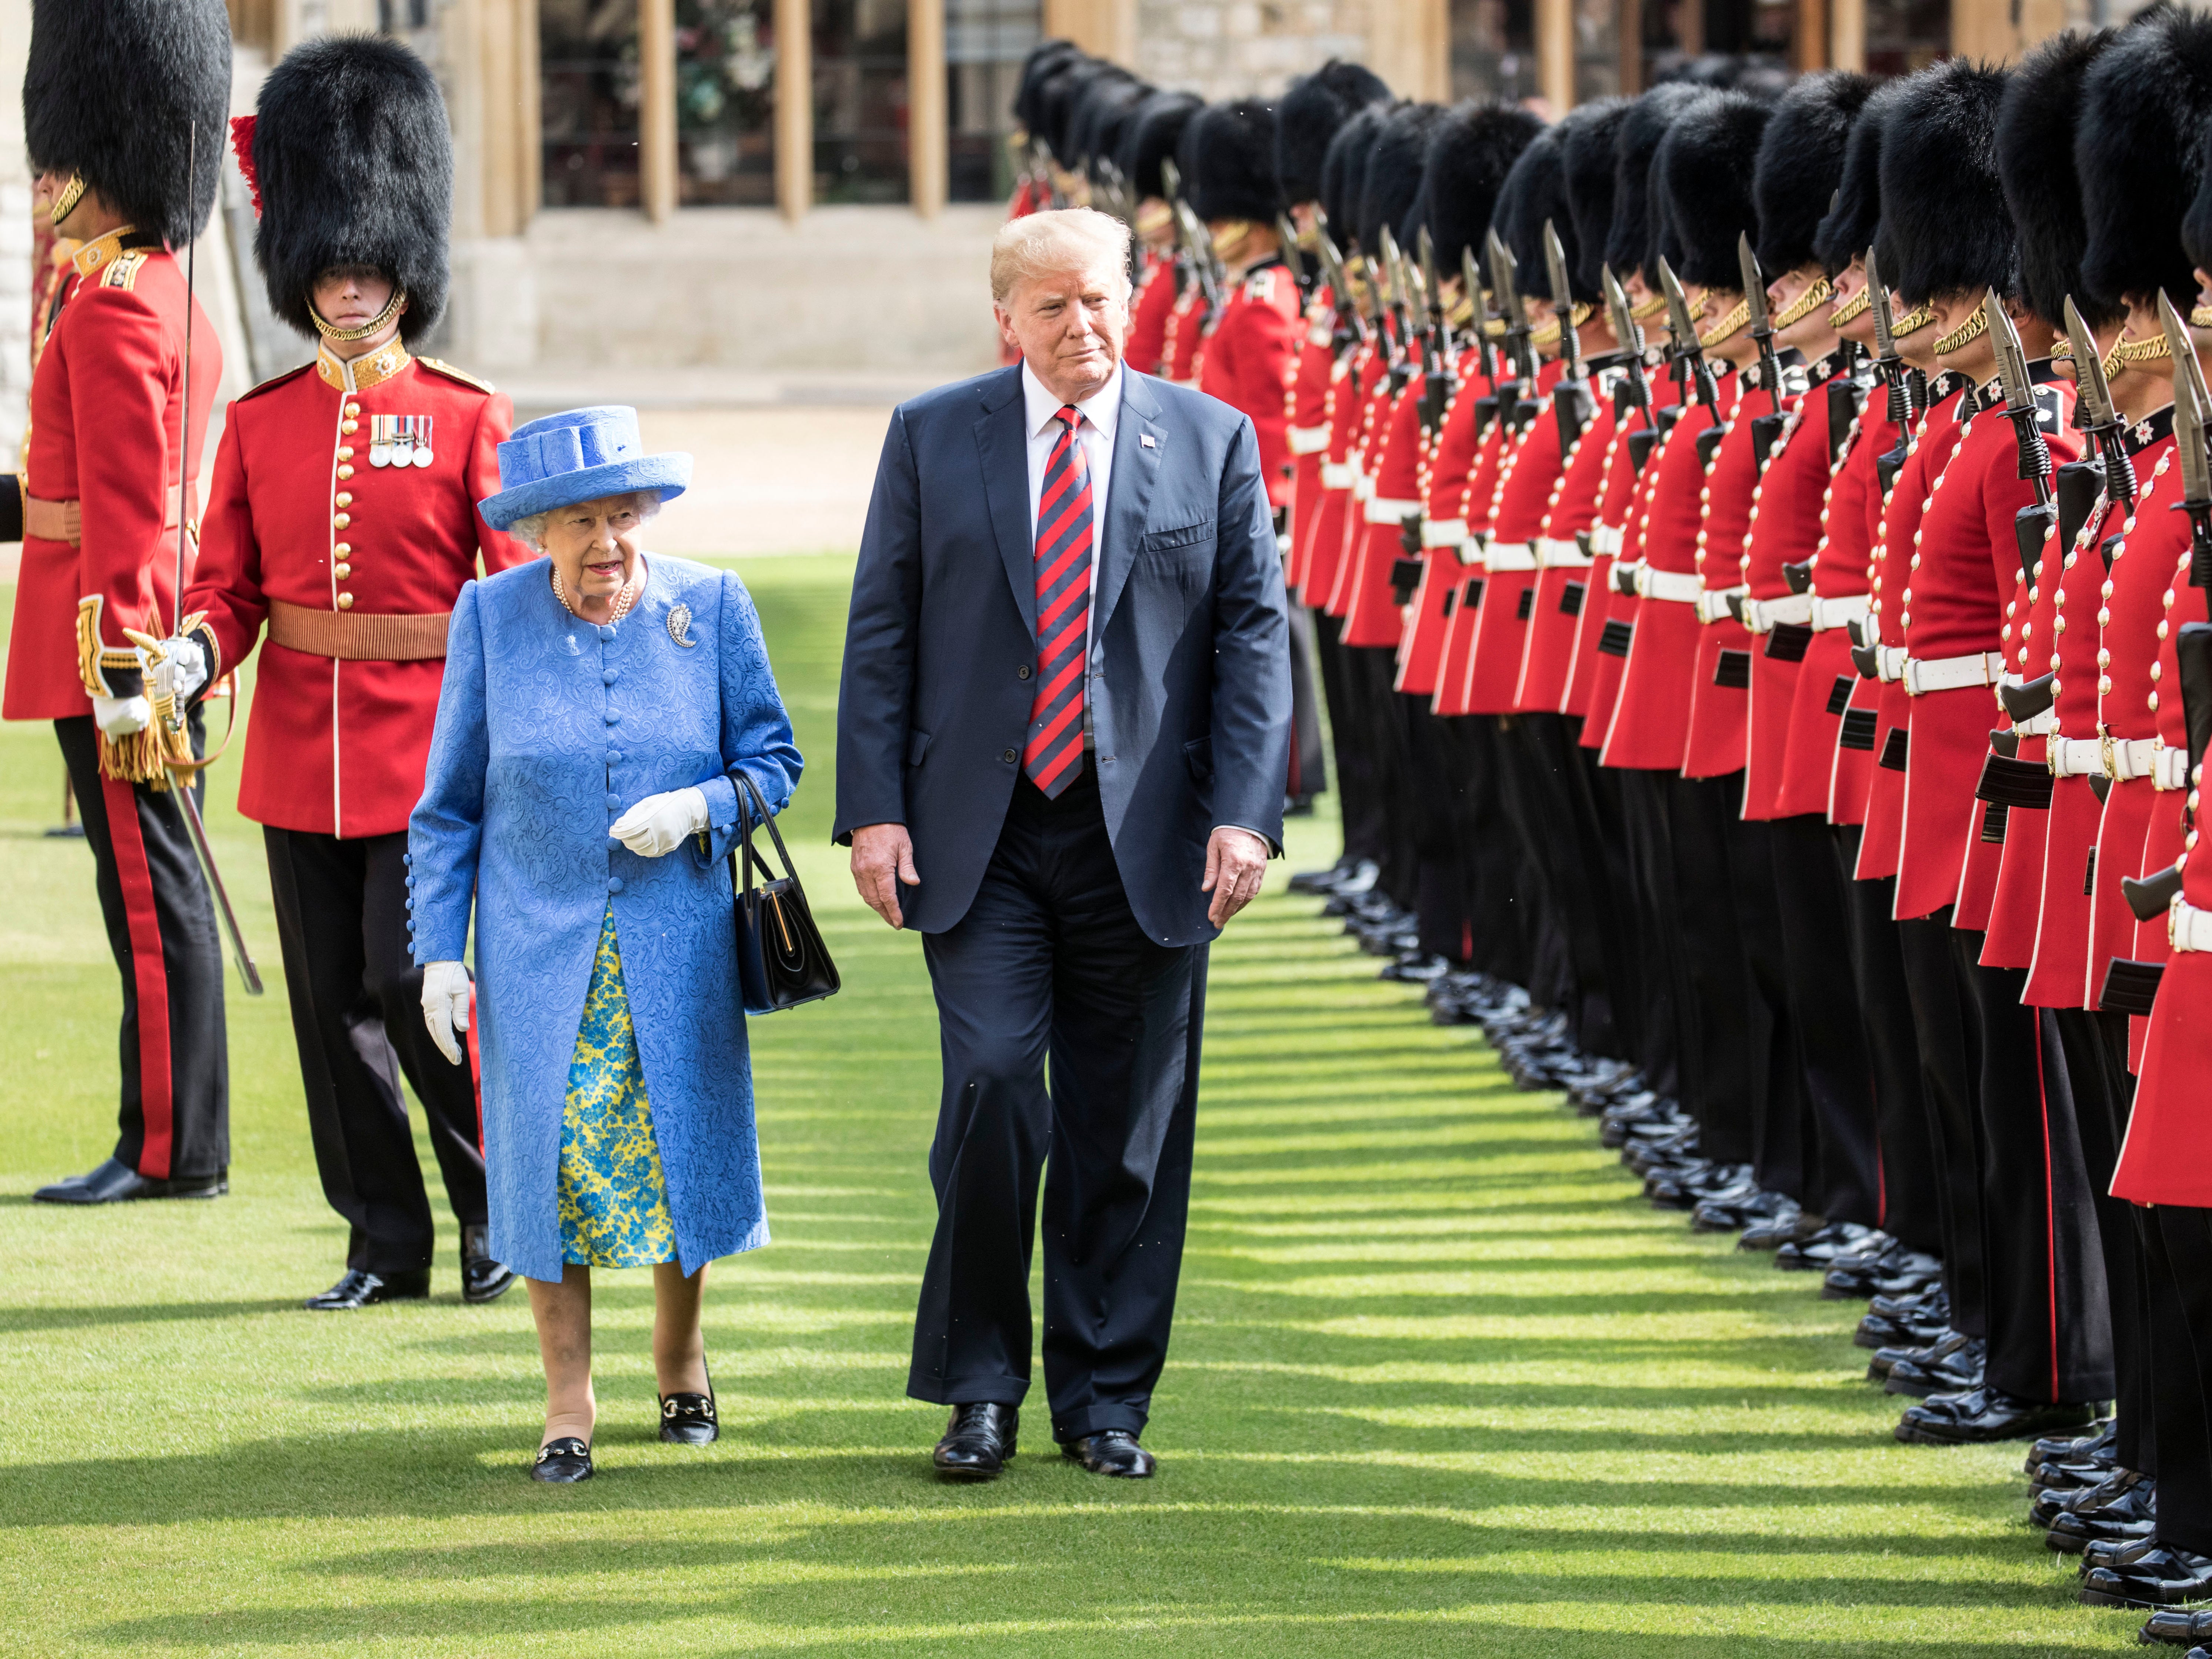 Donald Trump and Queen Elizabeth II inspect a guard of honour at Windsor Castle, in July 2018. He caused a brief breach of protocol by walking in front of her